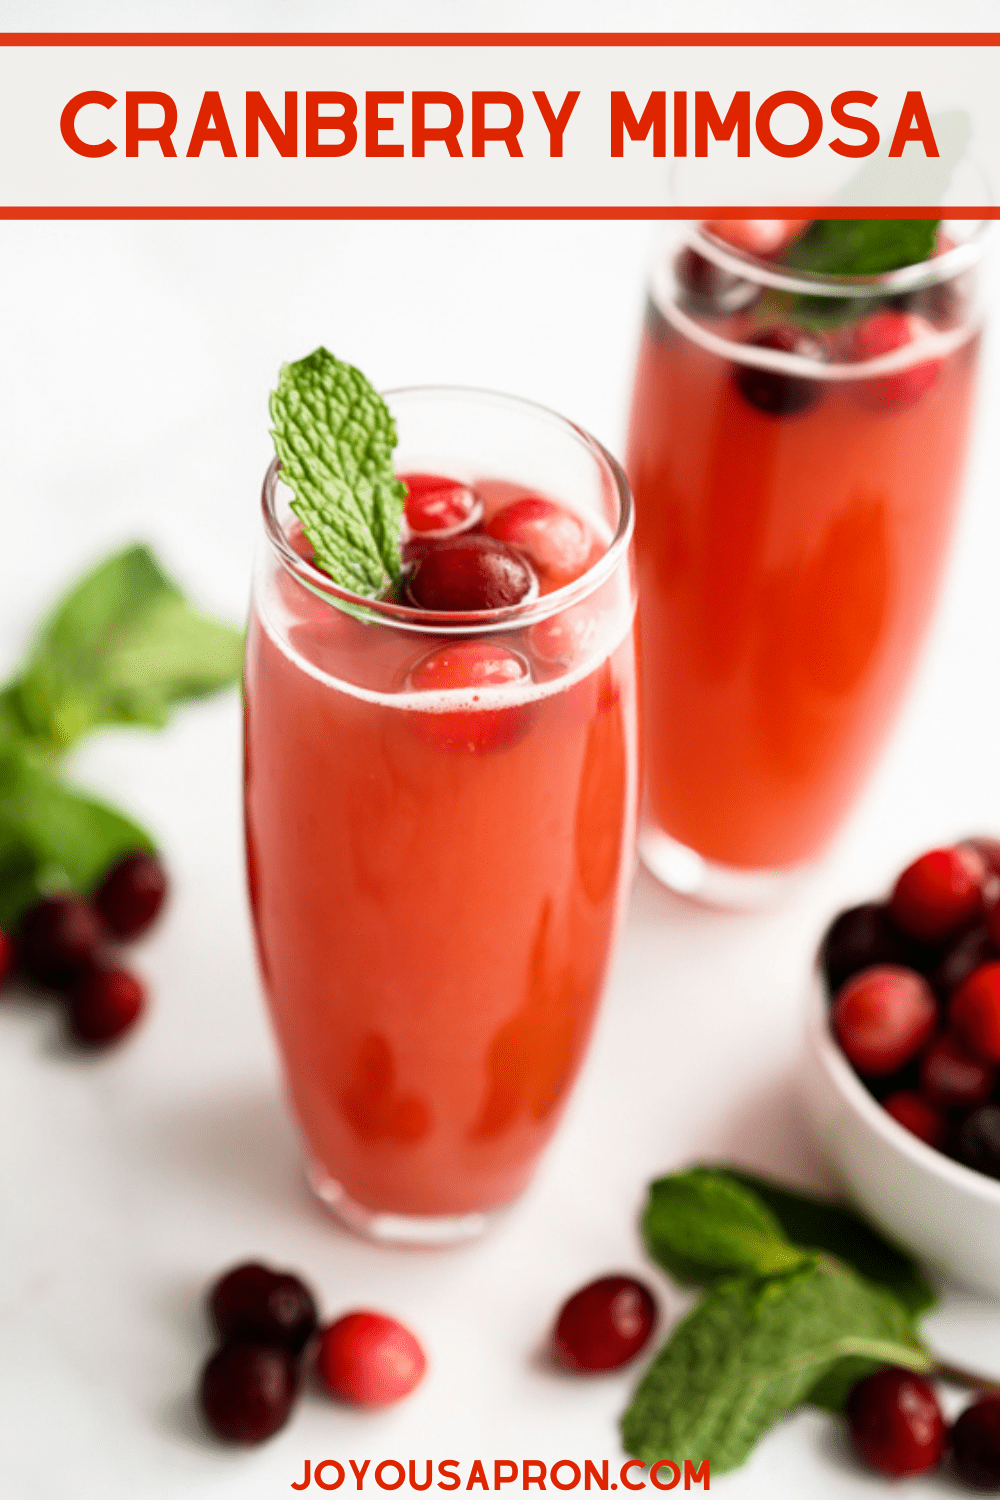 Cranberry Mimosa - Mimosa cocktail with a festive twist! This cranberry mimosa is a fizzy and delicious alcoholic drink perfect for the holidays! via @joyousapron